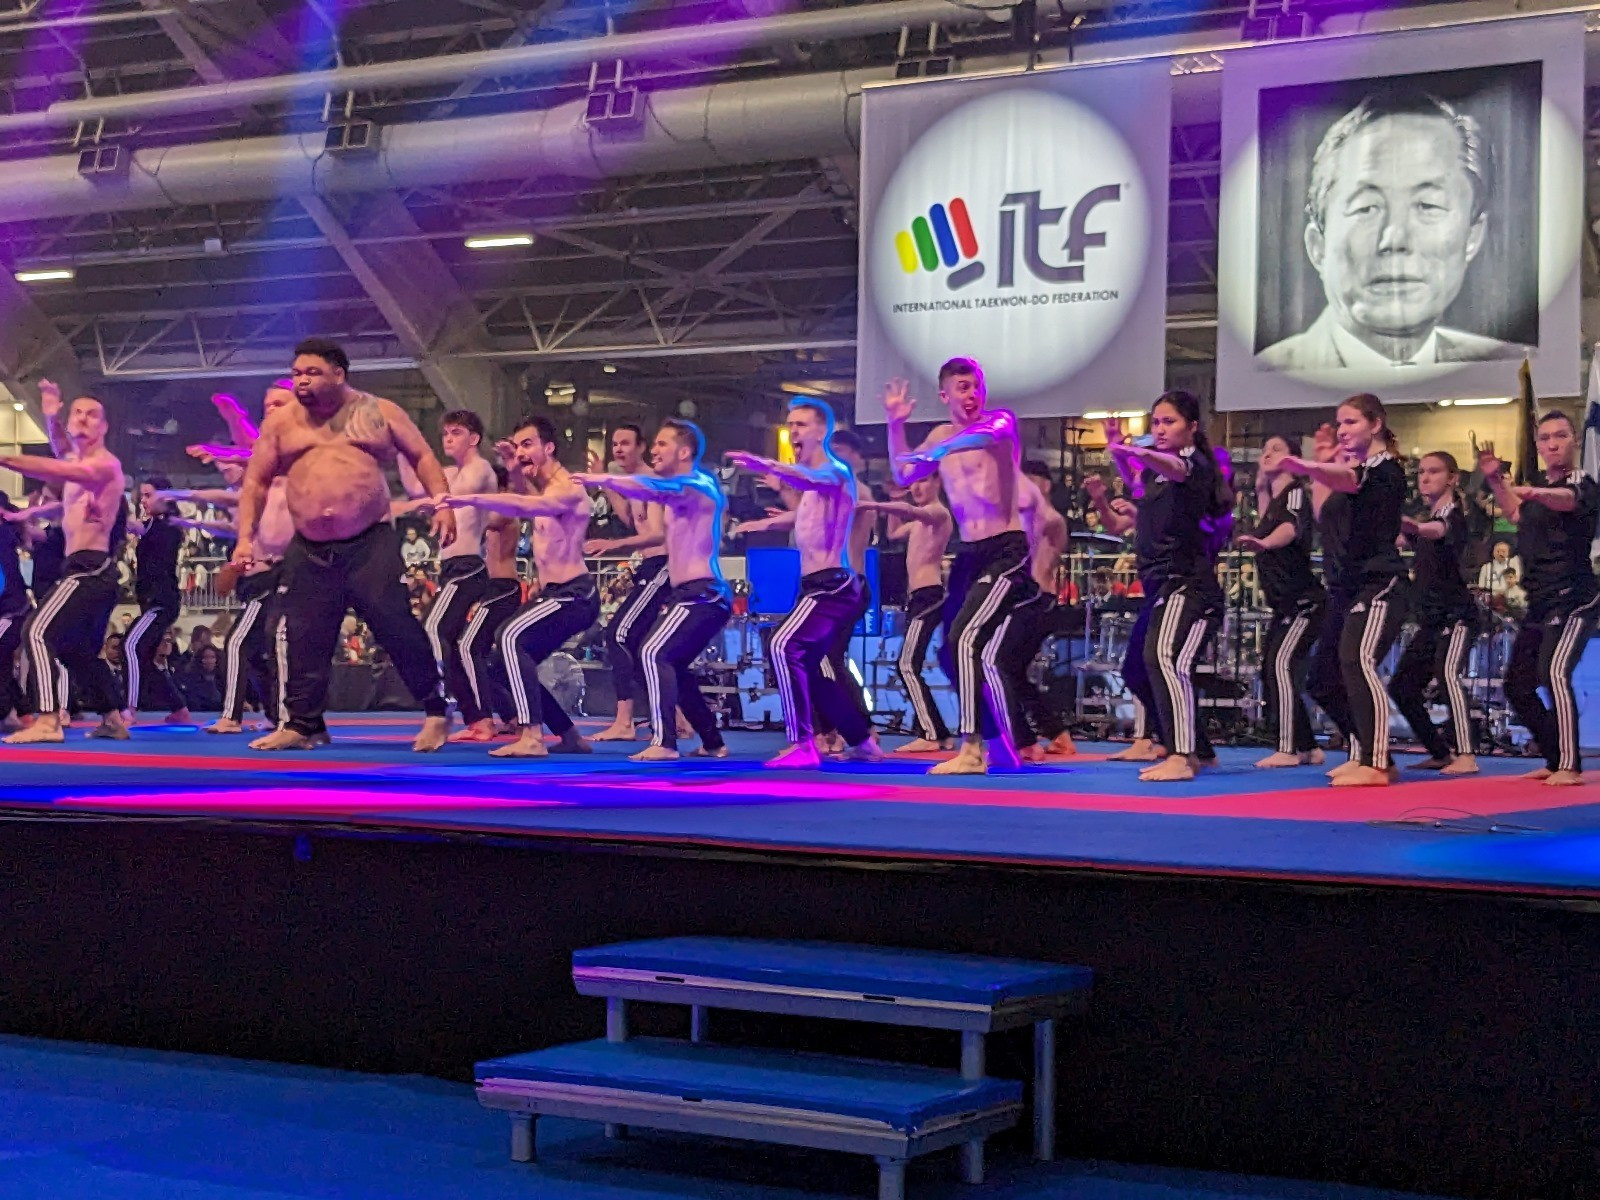 New Zealand's team performed the haka in an powerful cultural dimension to the Opening Ceremony ©ITF